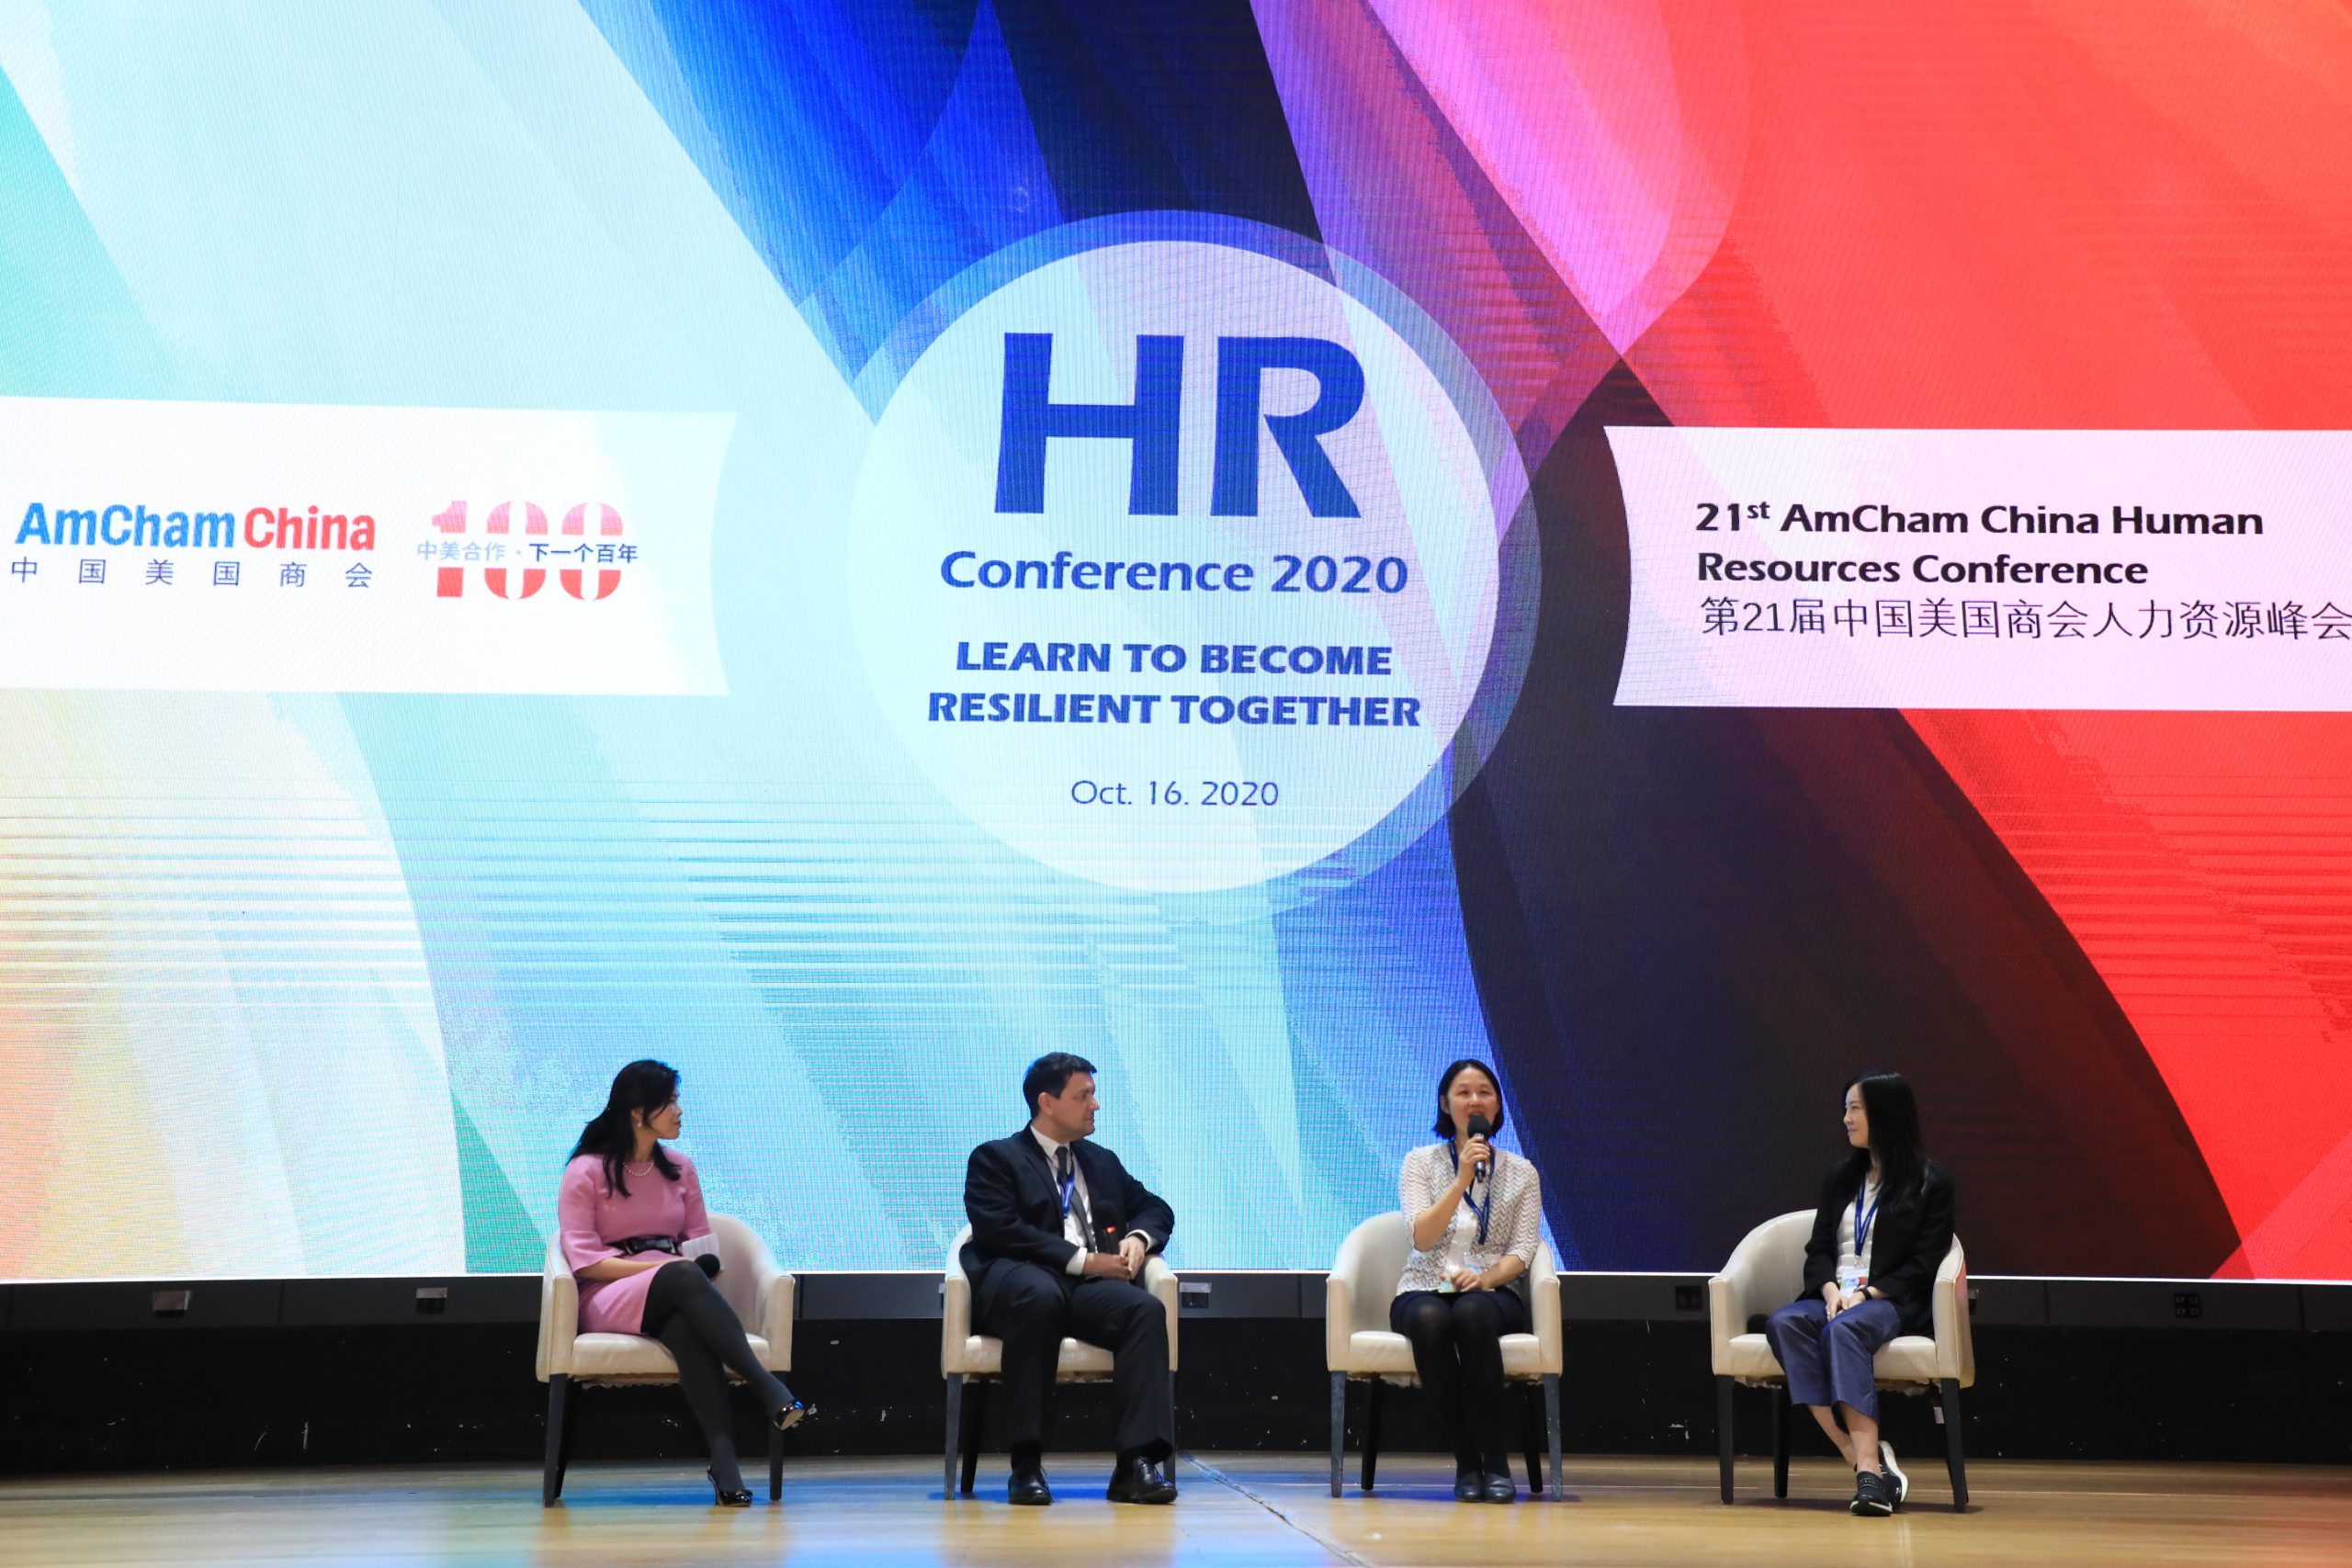 2020 HR Conference Resilient Together AmCham China